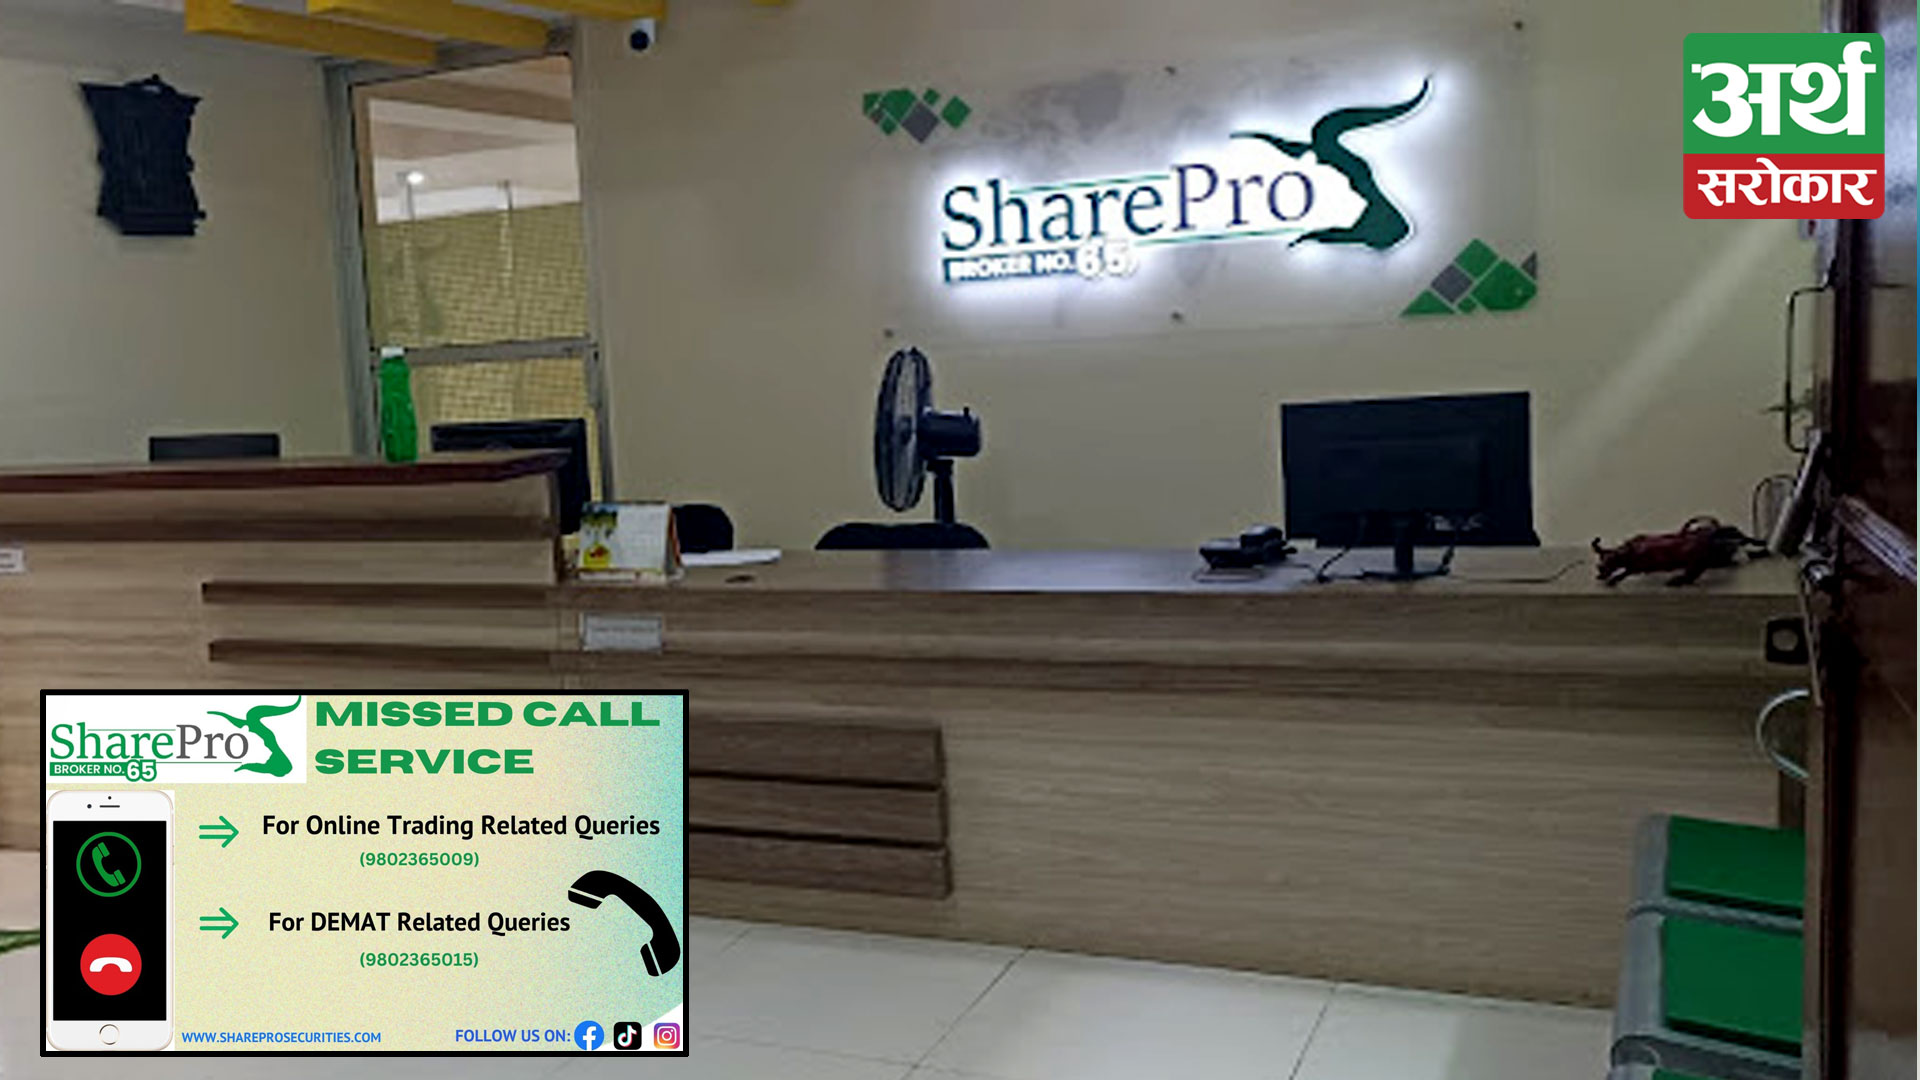 Sharepro Securities Launches Innovative MISSED CALL Service